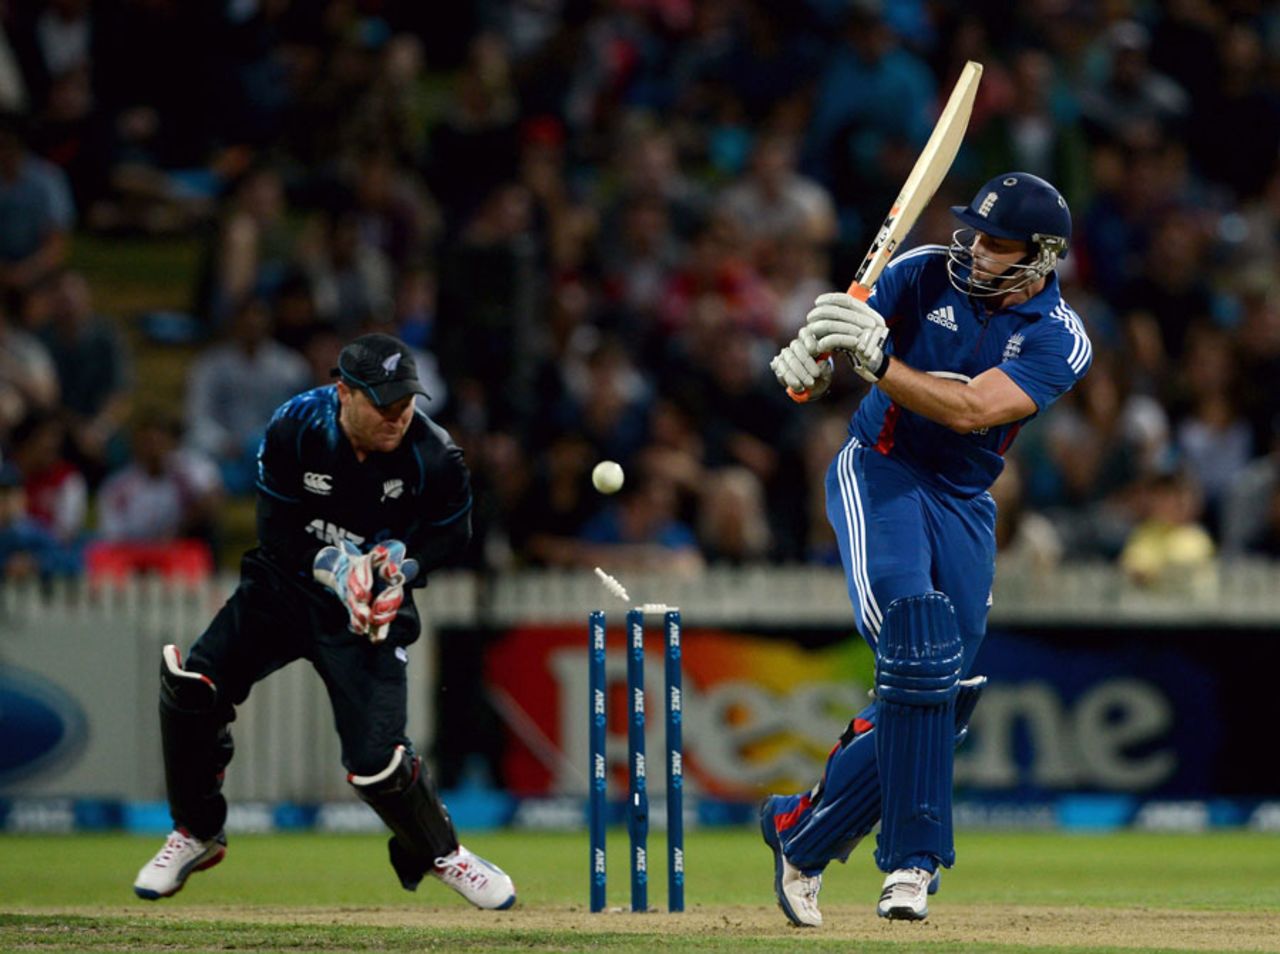 Michael Lumb was bowled off his pad by Nathan McCullum, New Zealand v England, 2nd T20, Hamilton, February 12, 2013